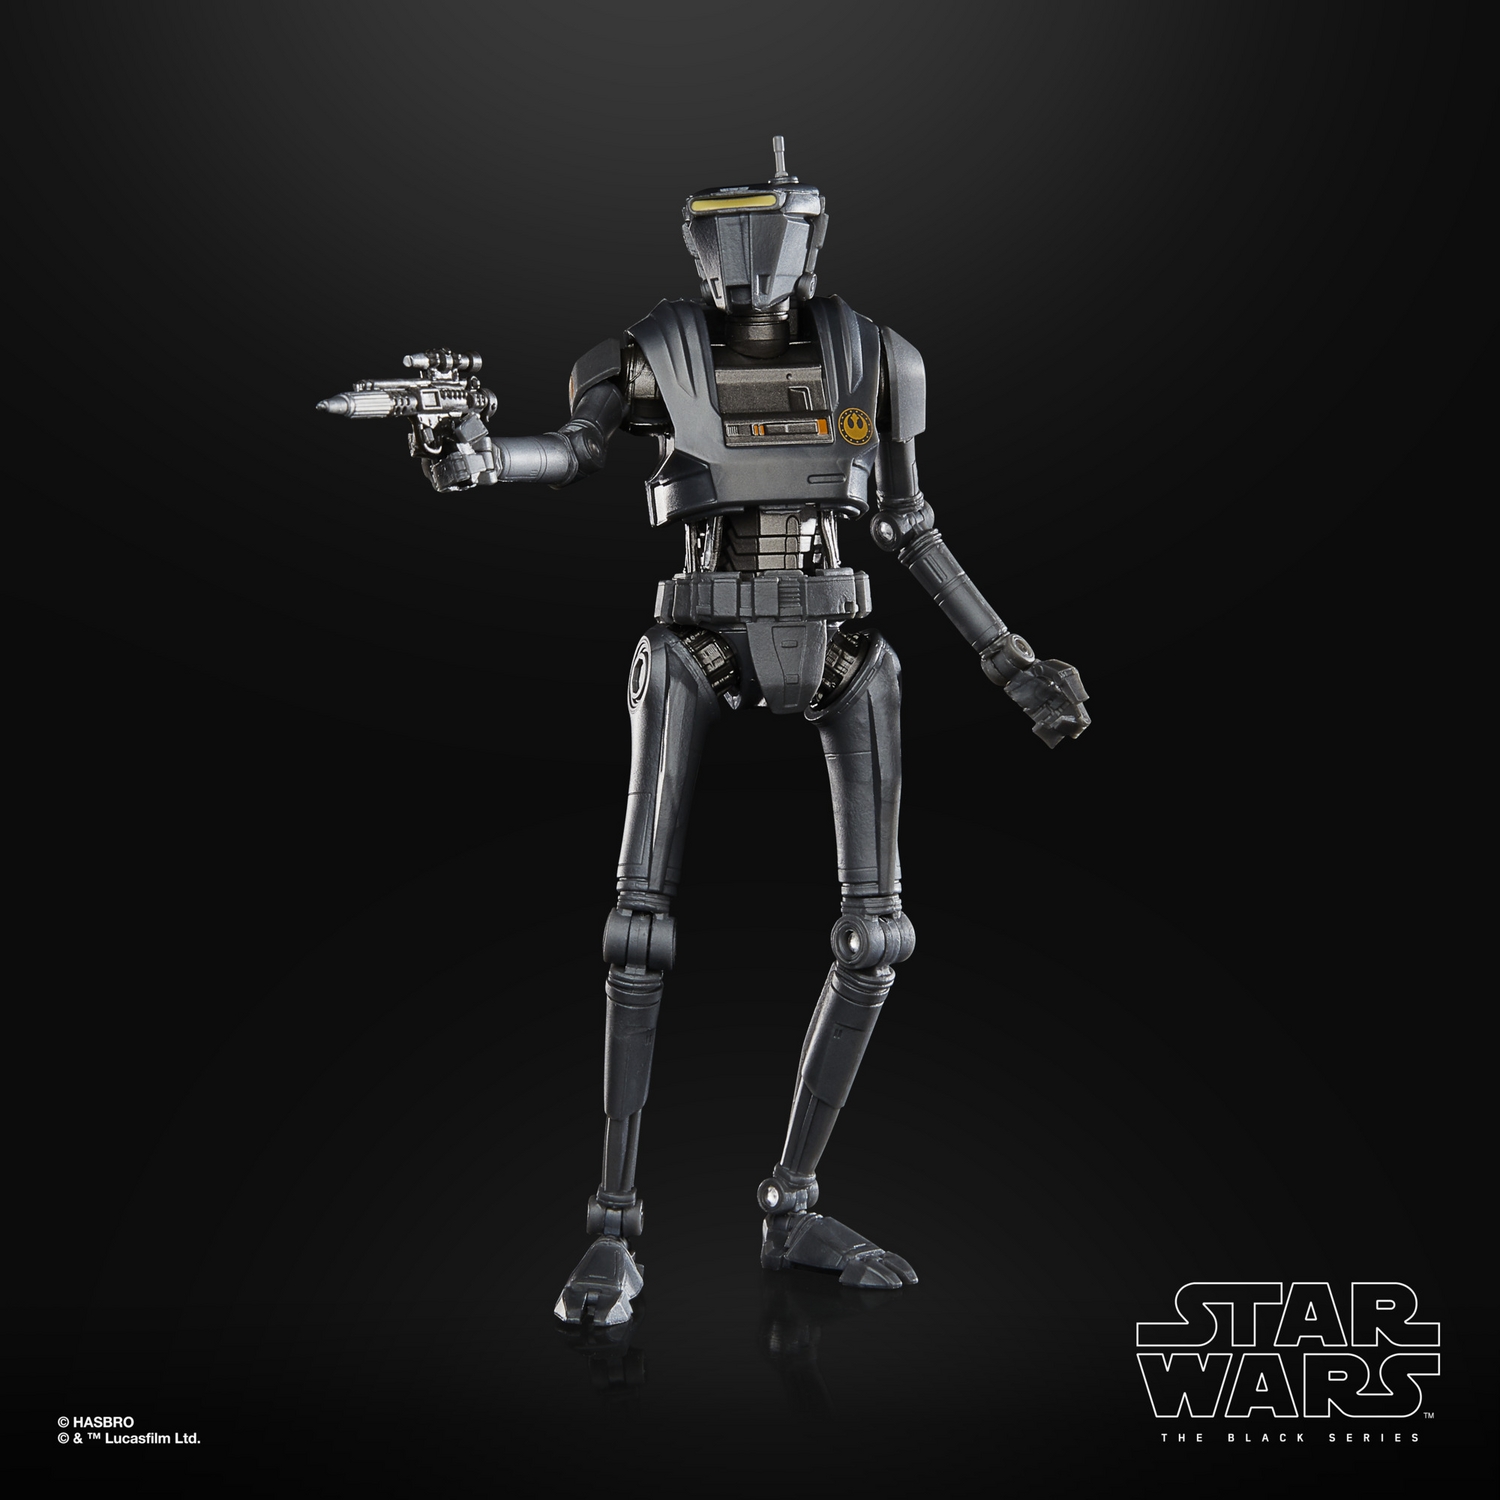 STAR WARS THE BLACK SERIES 6-INCH NEW REPUBLIC SECURITY DROID FIGURE - 6.jpg